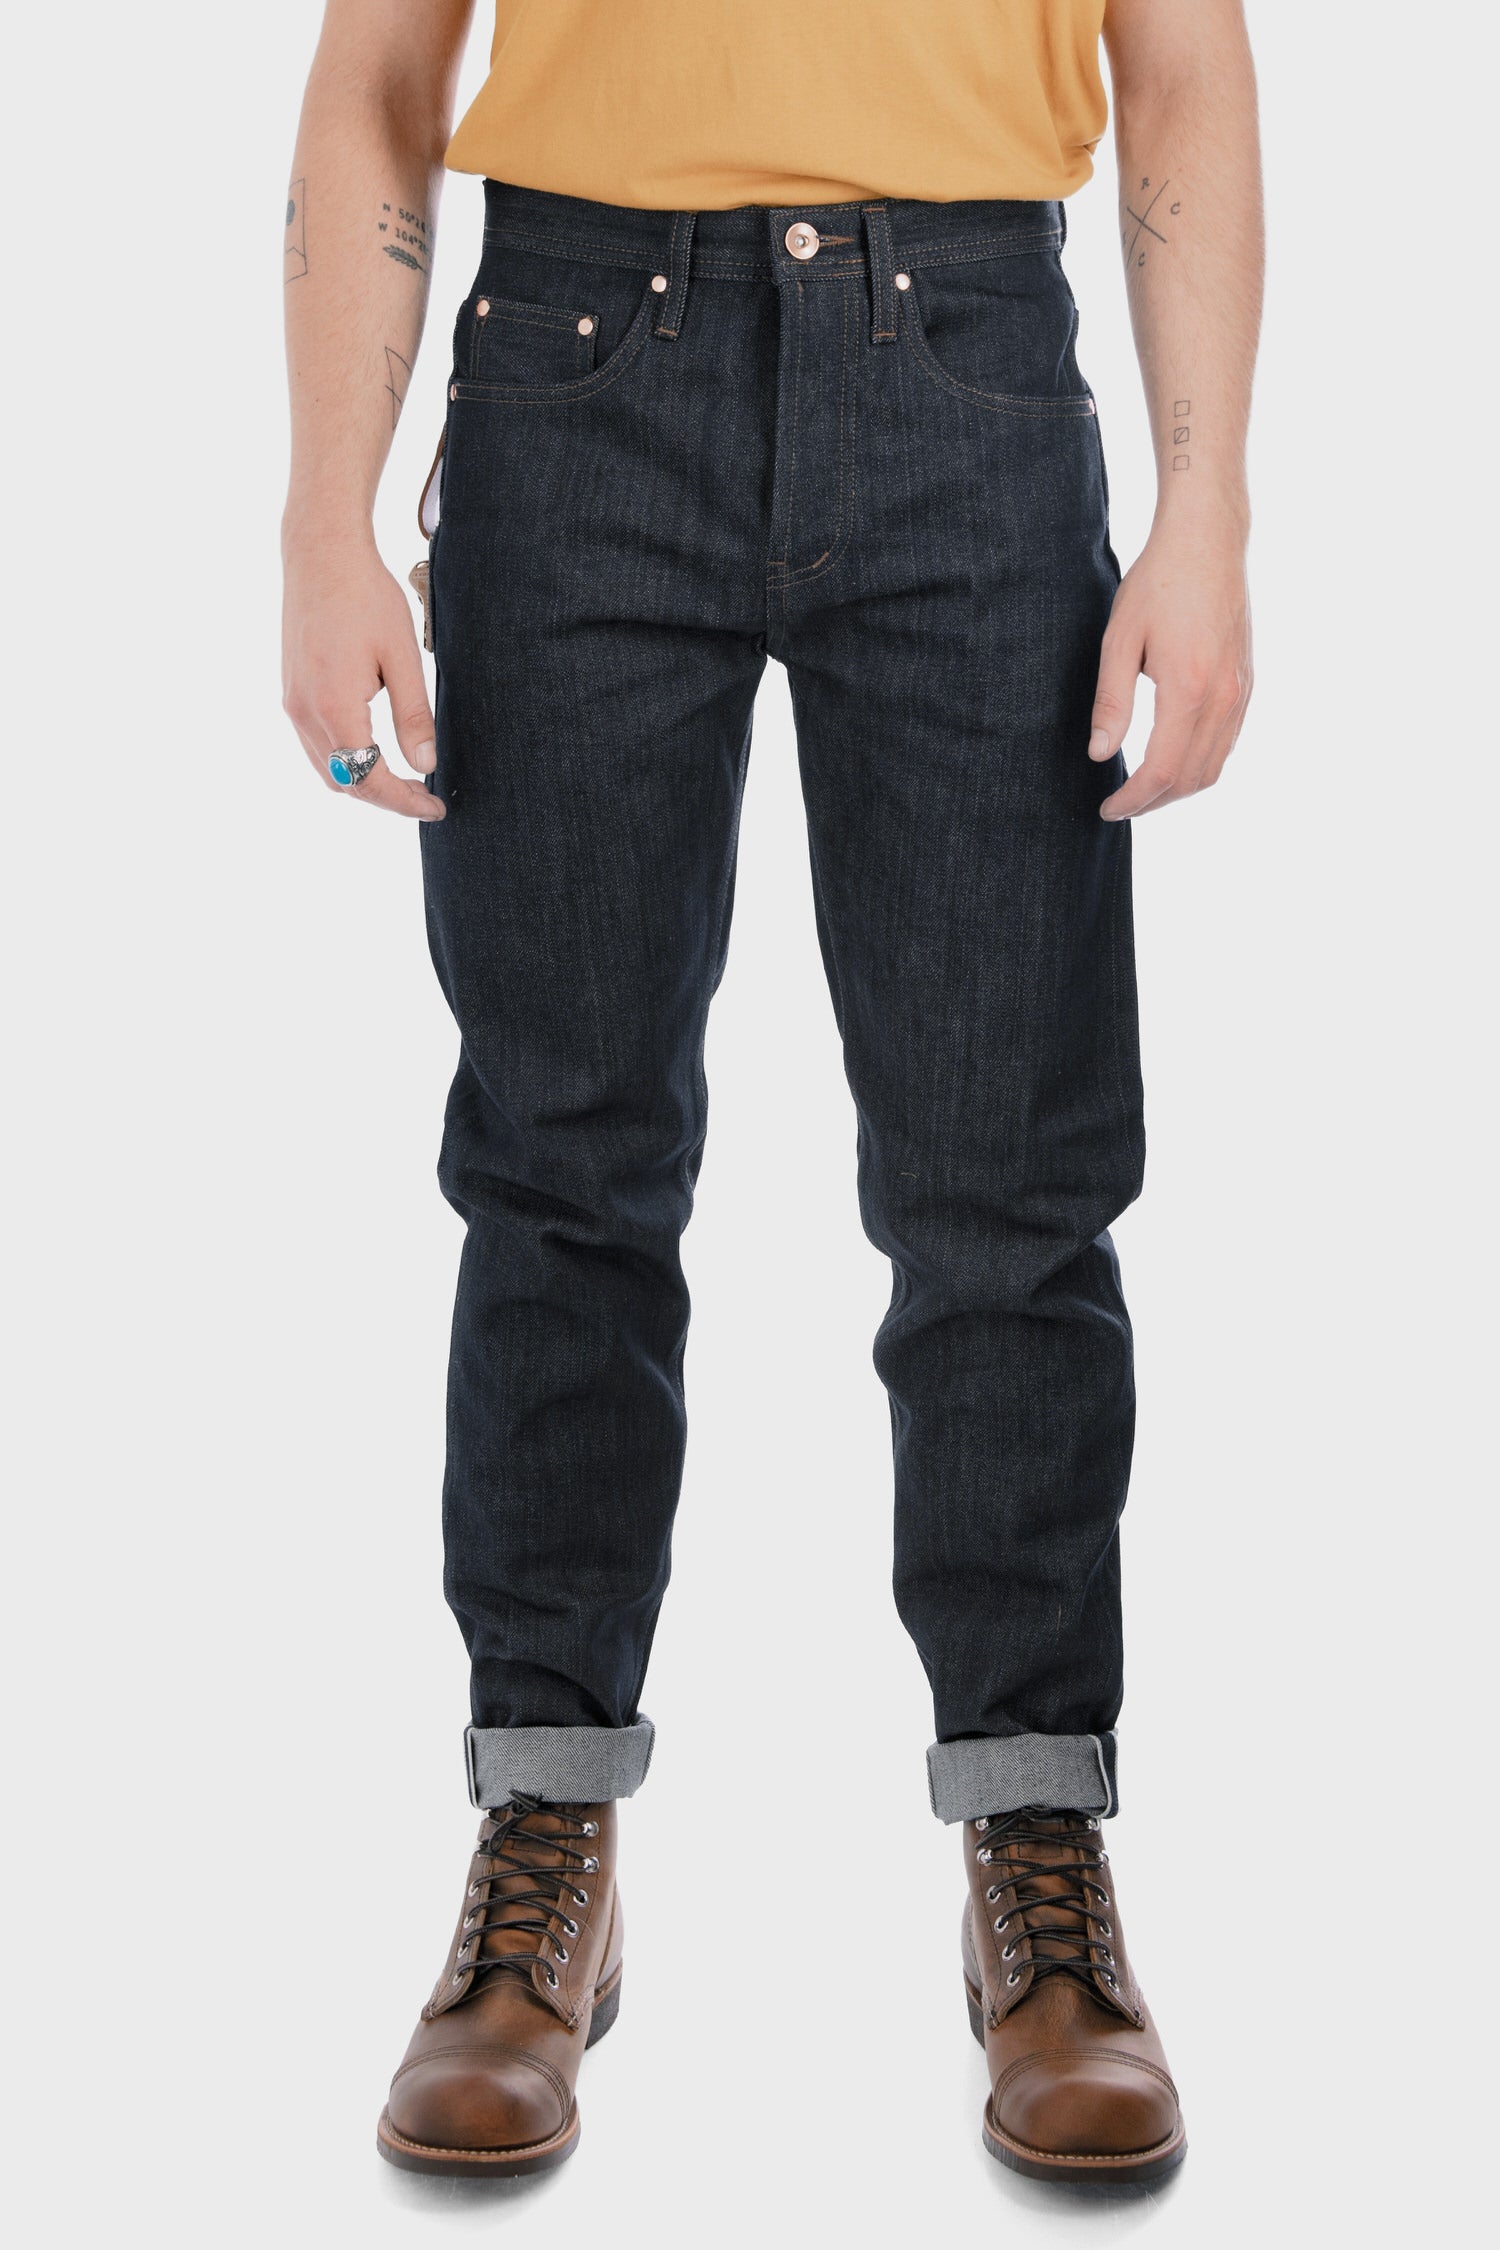 Men's Unbranded Brand Relaxed Tapered Fit in Indigo Selvedge — Philistine